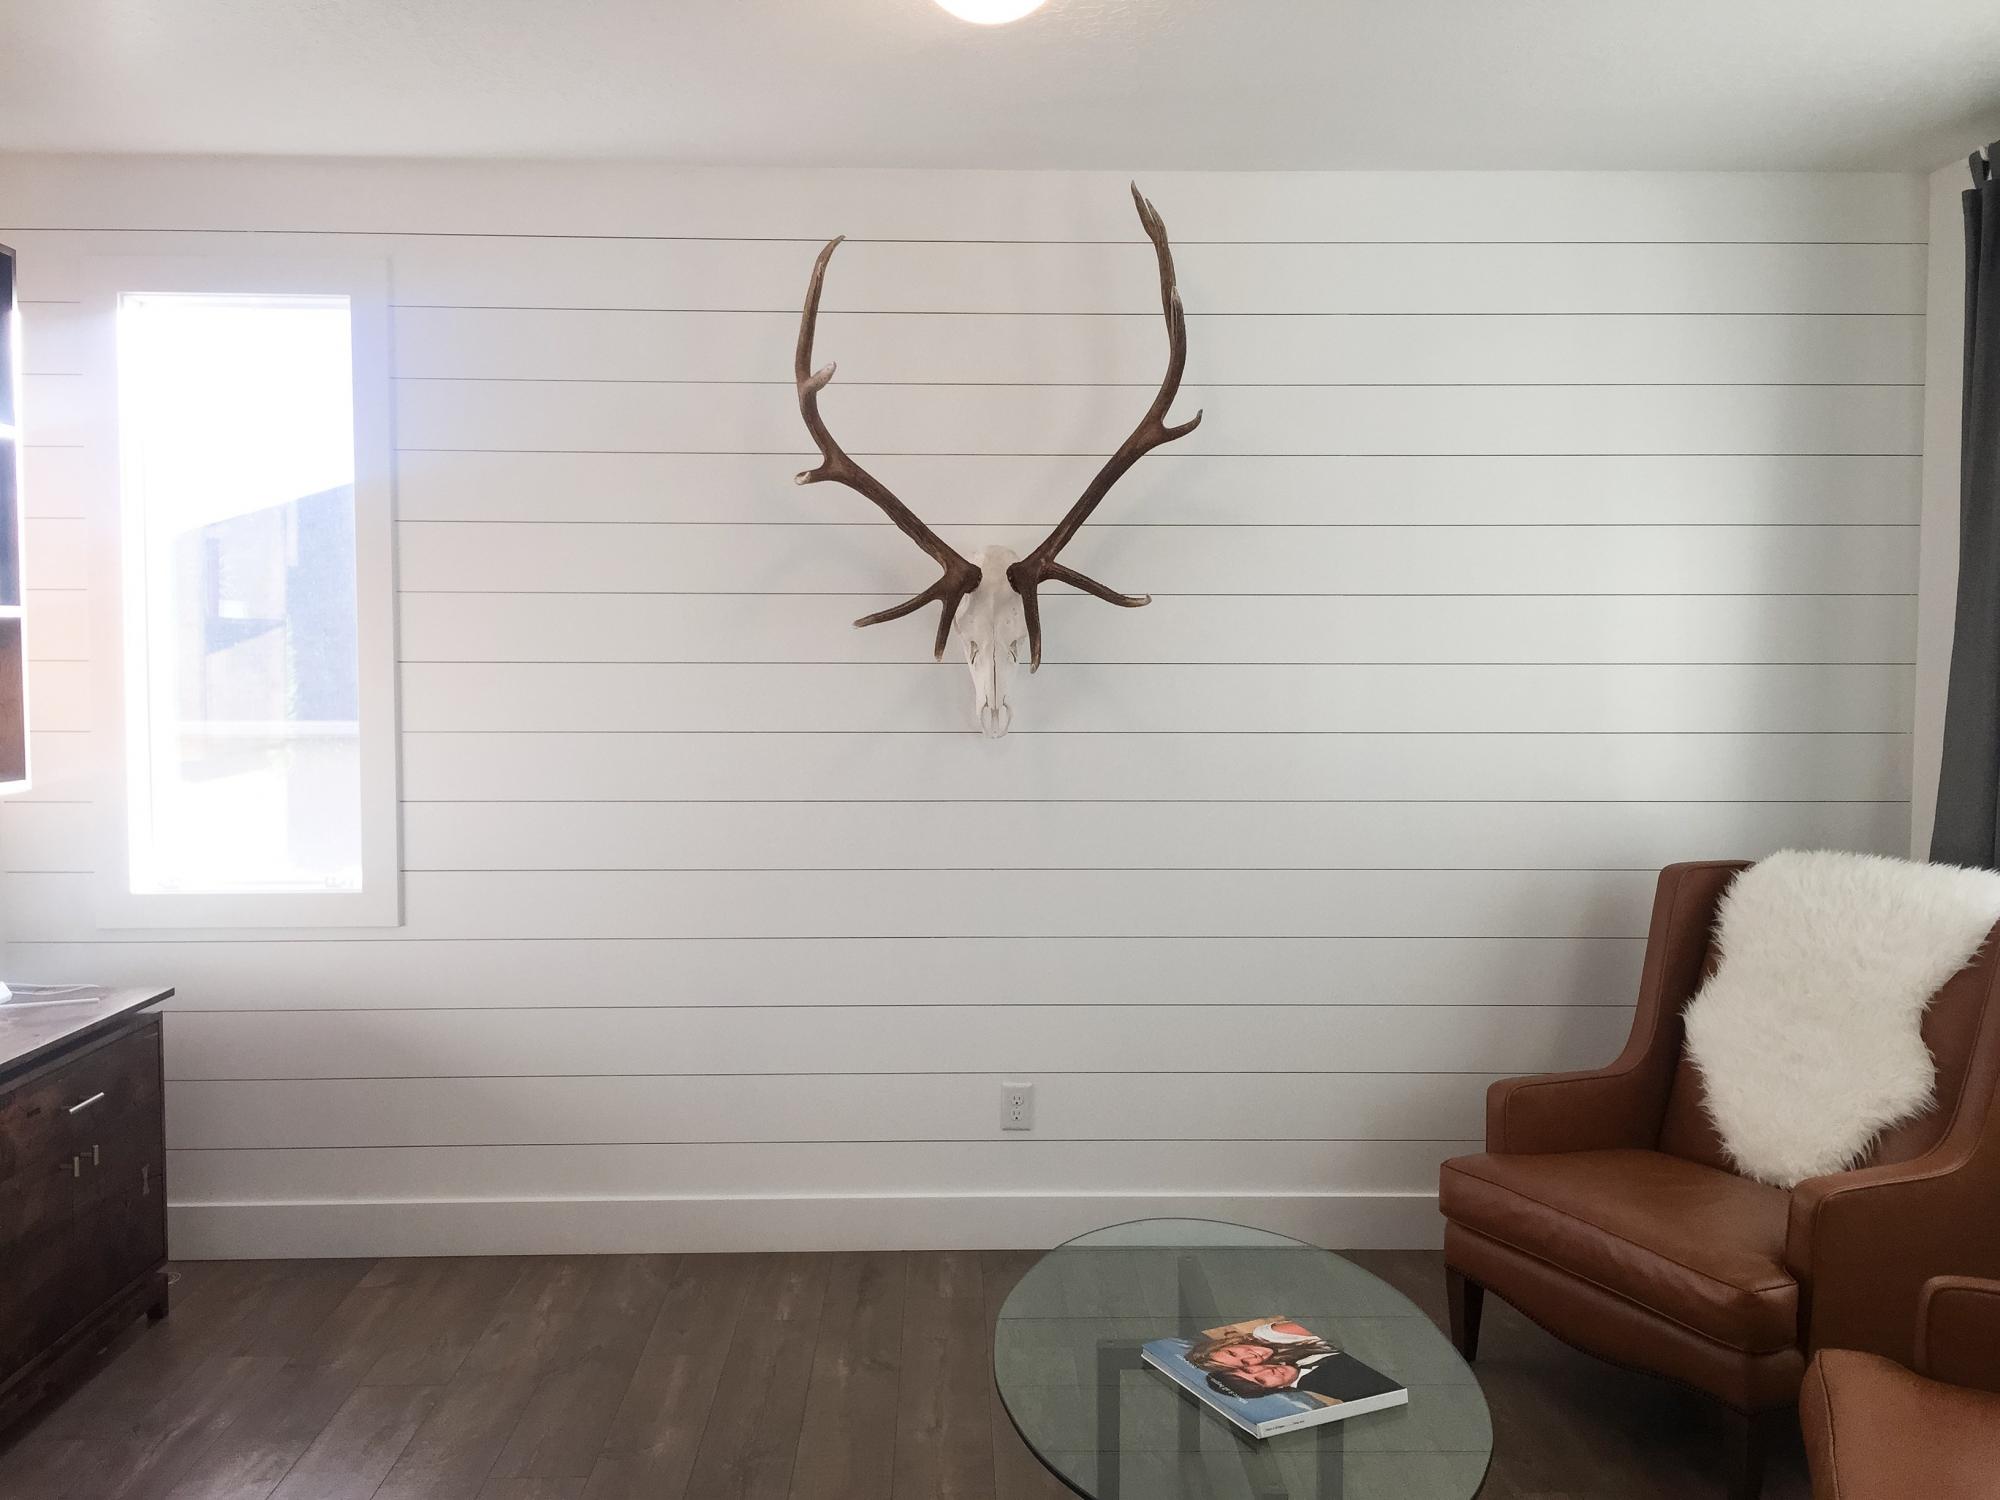 A living room with a reclaimed wood deer head on the wall.